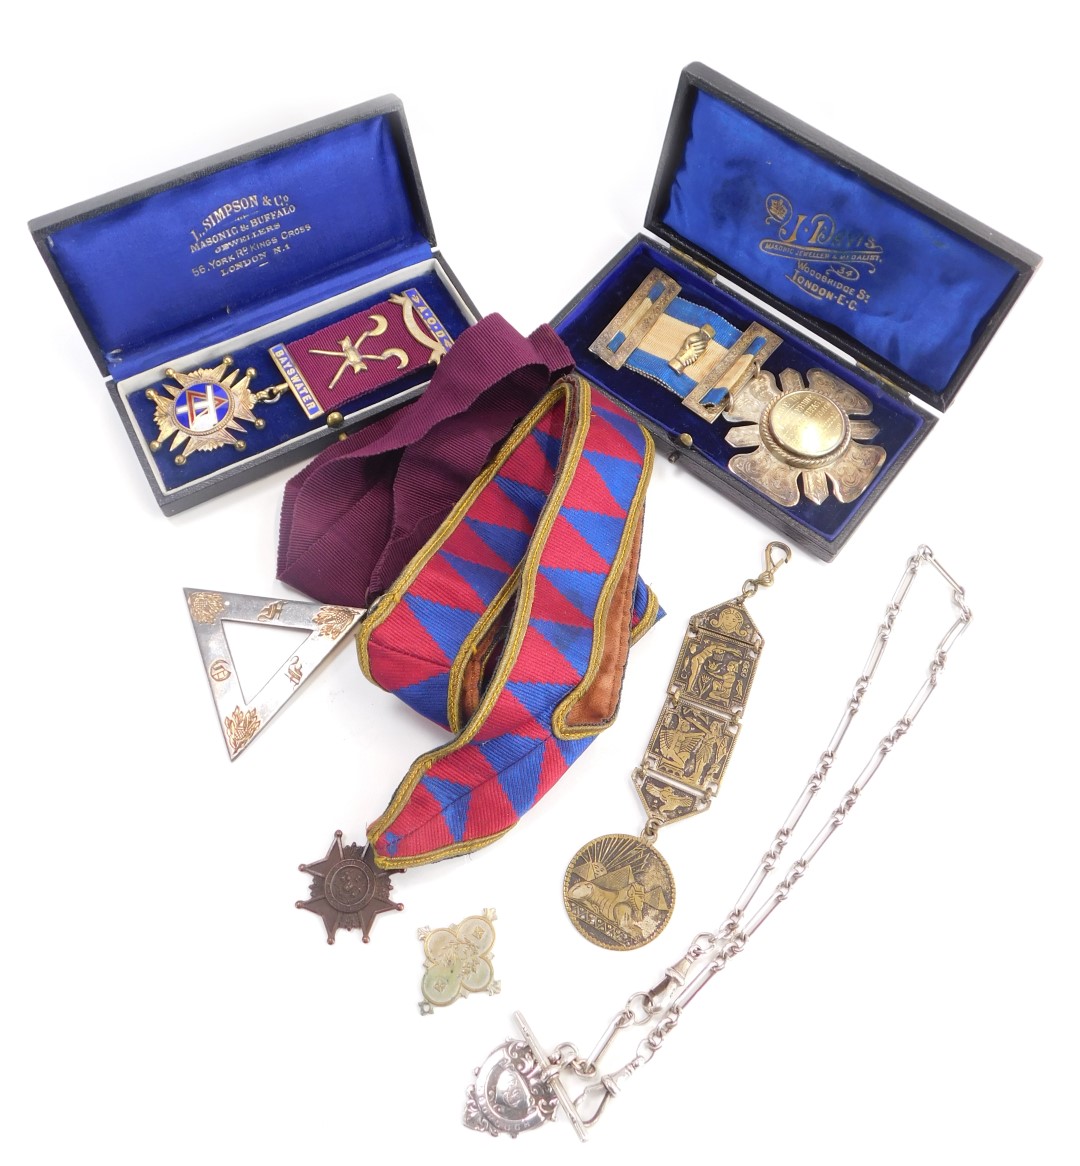 Masonic interest, comprising a Bays Water silver and enamel medal presented to Brother G Tourret